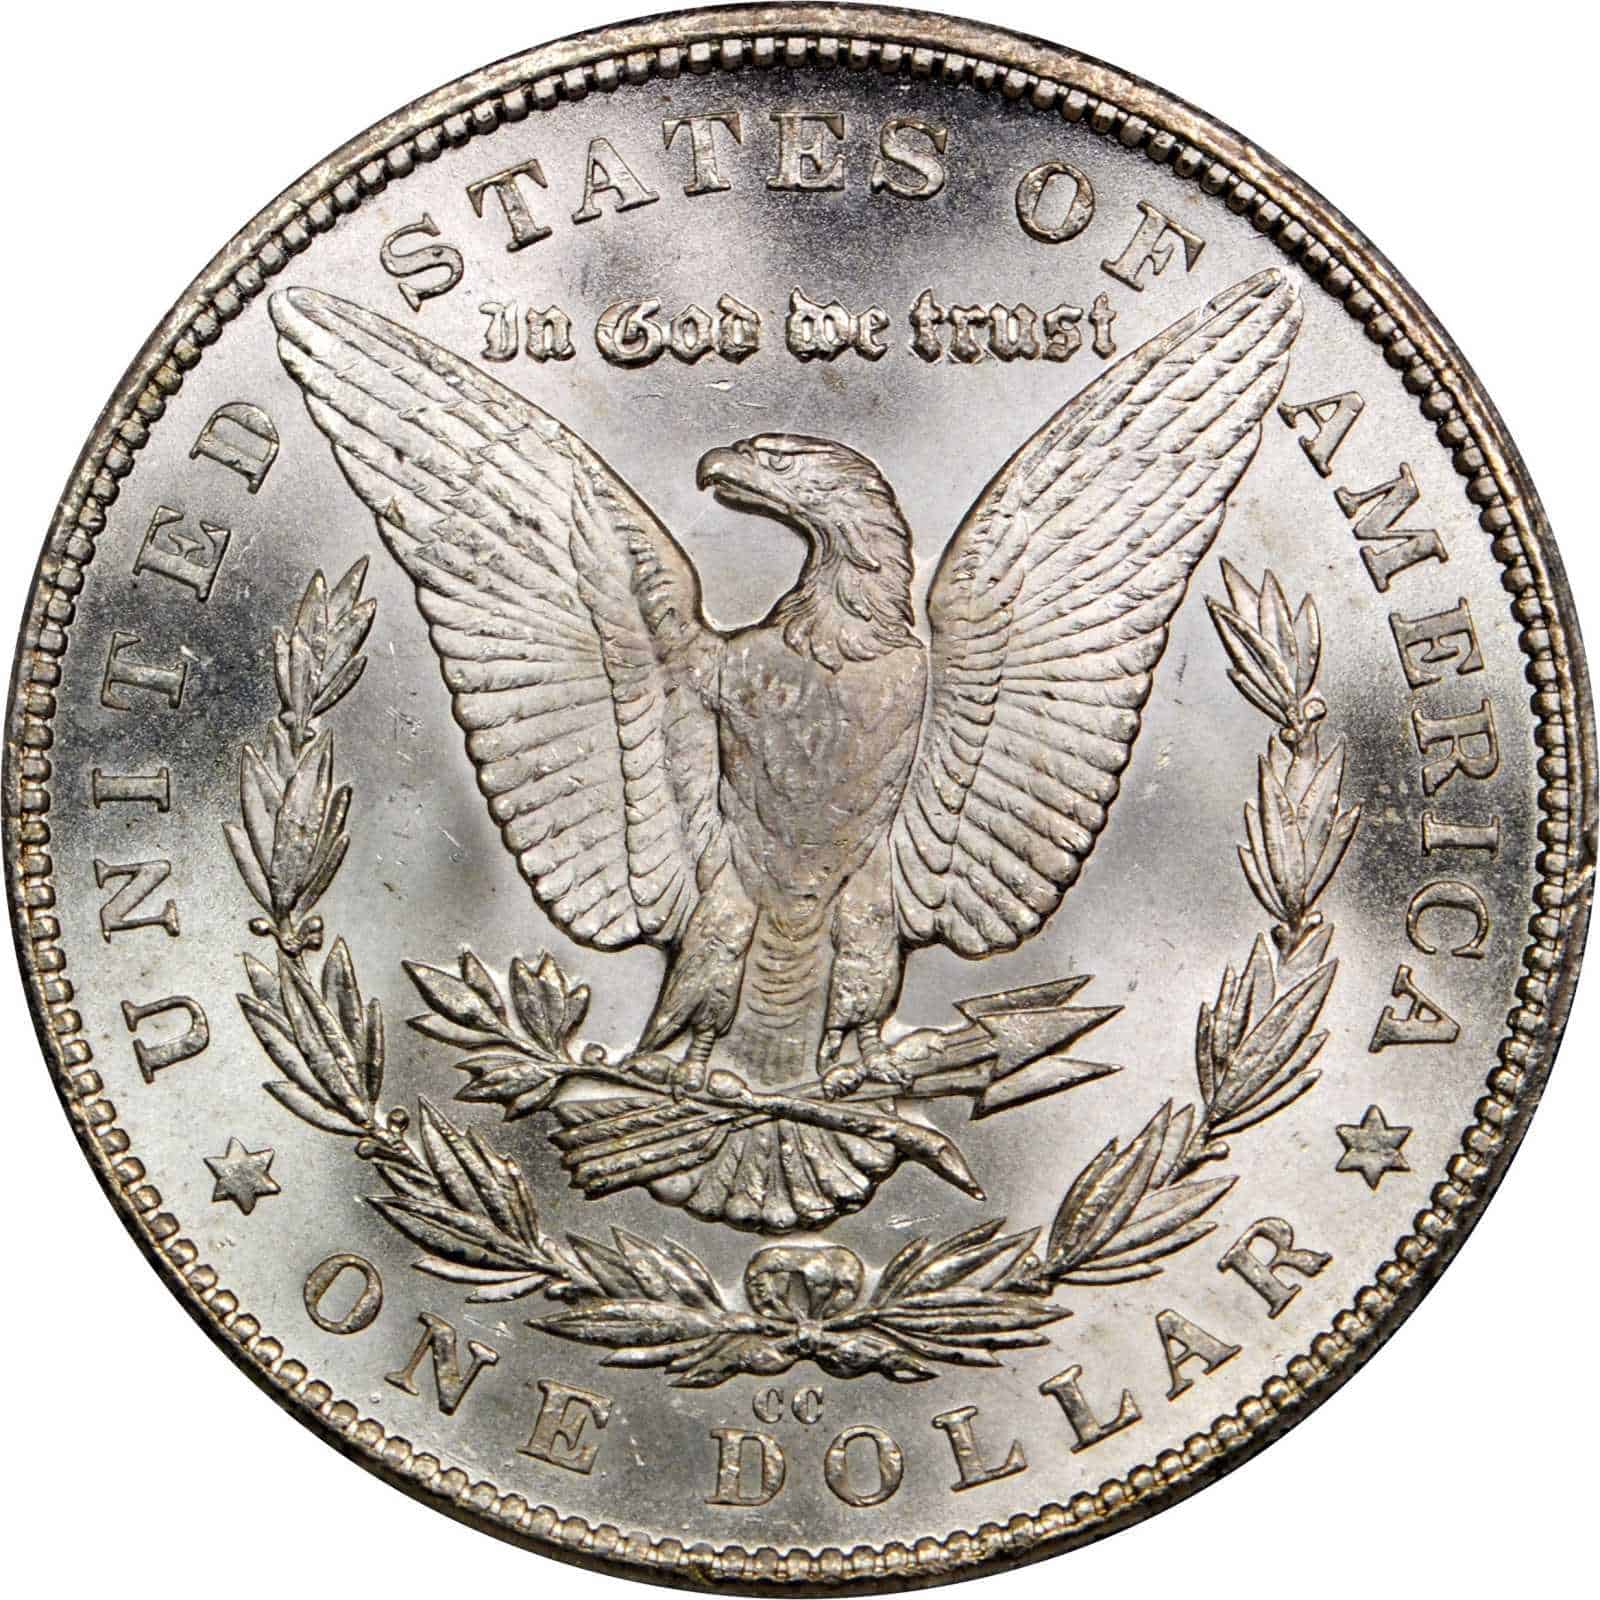 The Reverse of the 1879 Silver Dollar